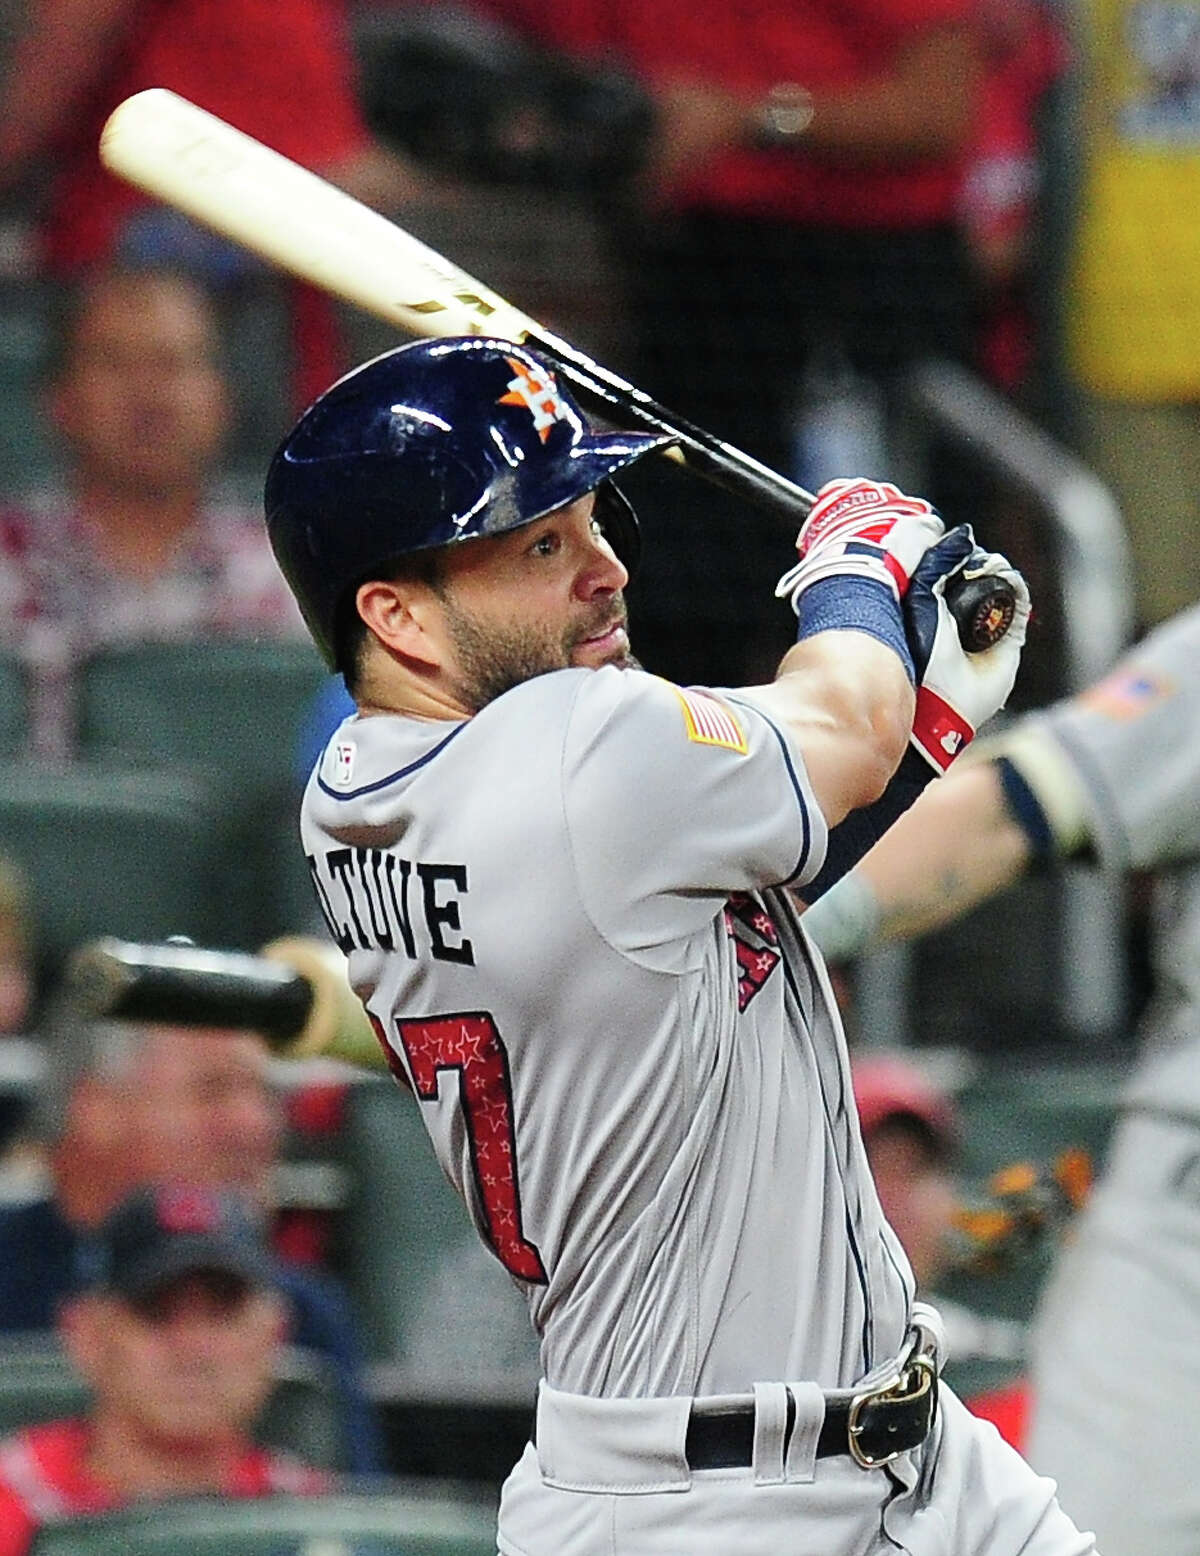 ATLANTA, GA - JULY 4: Jose Altuve #27 of the Houston Astros knocks in two runs with a fifth-inning double against the Atlanta Braves at SunTrust Park on July 4, 2017 in Atlanta, Georgia. (Photo by Scott Cunningham/Getty Images)